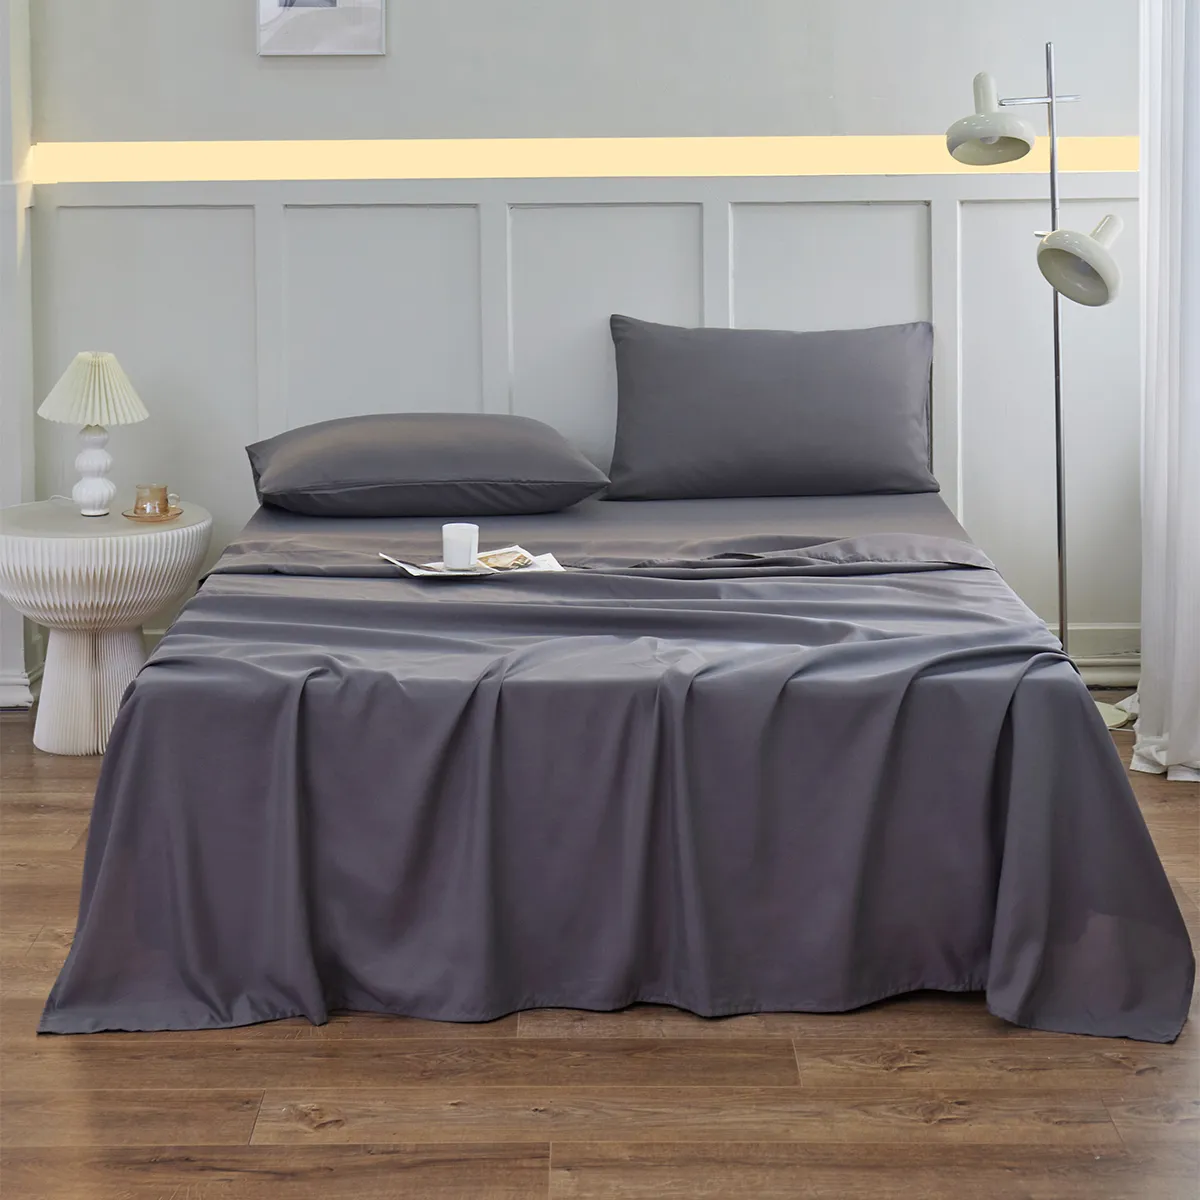 Solid Color Bedding Set: Three-piece Set with Fitted Sheet, Pillowcase, and Flat Sheet  Grey big image 1